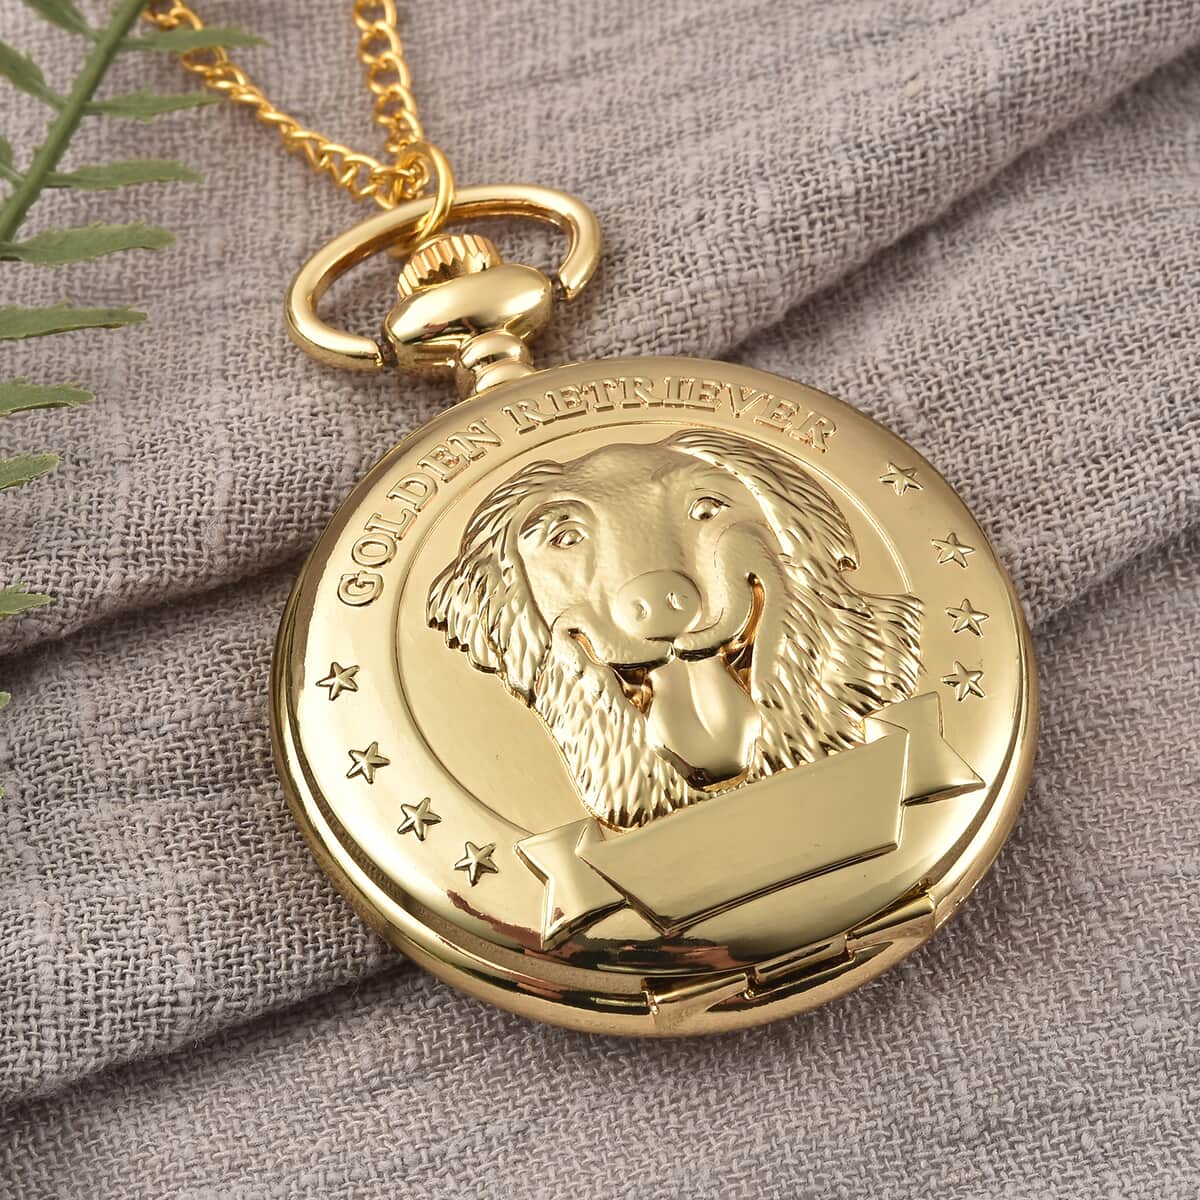 Strada Japanese Movement Golden Retriever Pocket Watch in Goldtone with Chain (31 Inches) image number 1